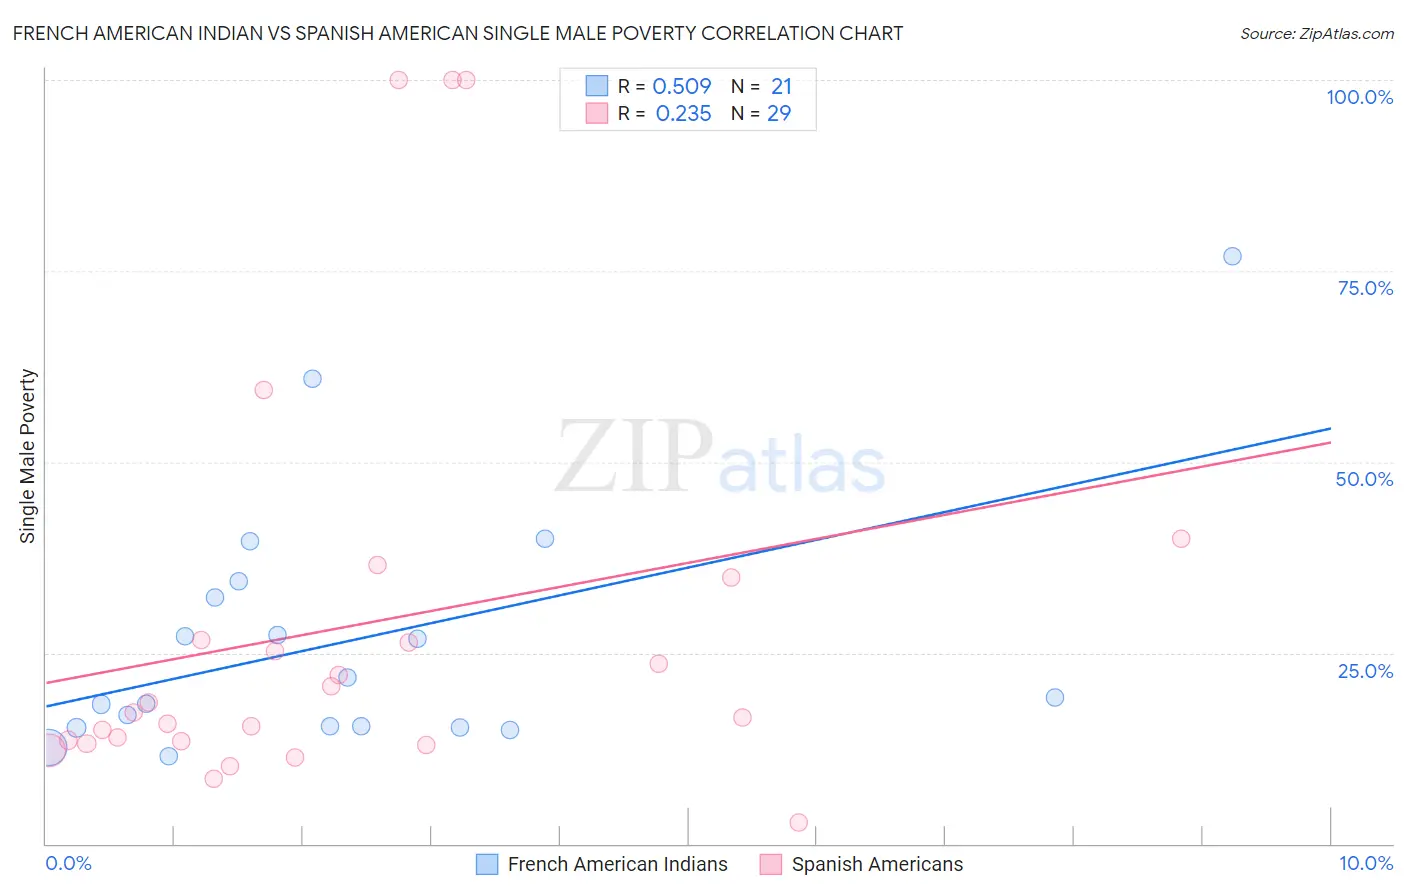 French American Indian vs Spanish American Single Male Poverty